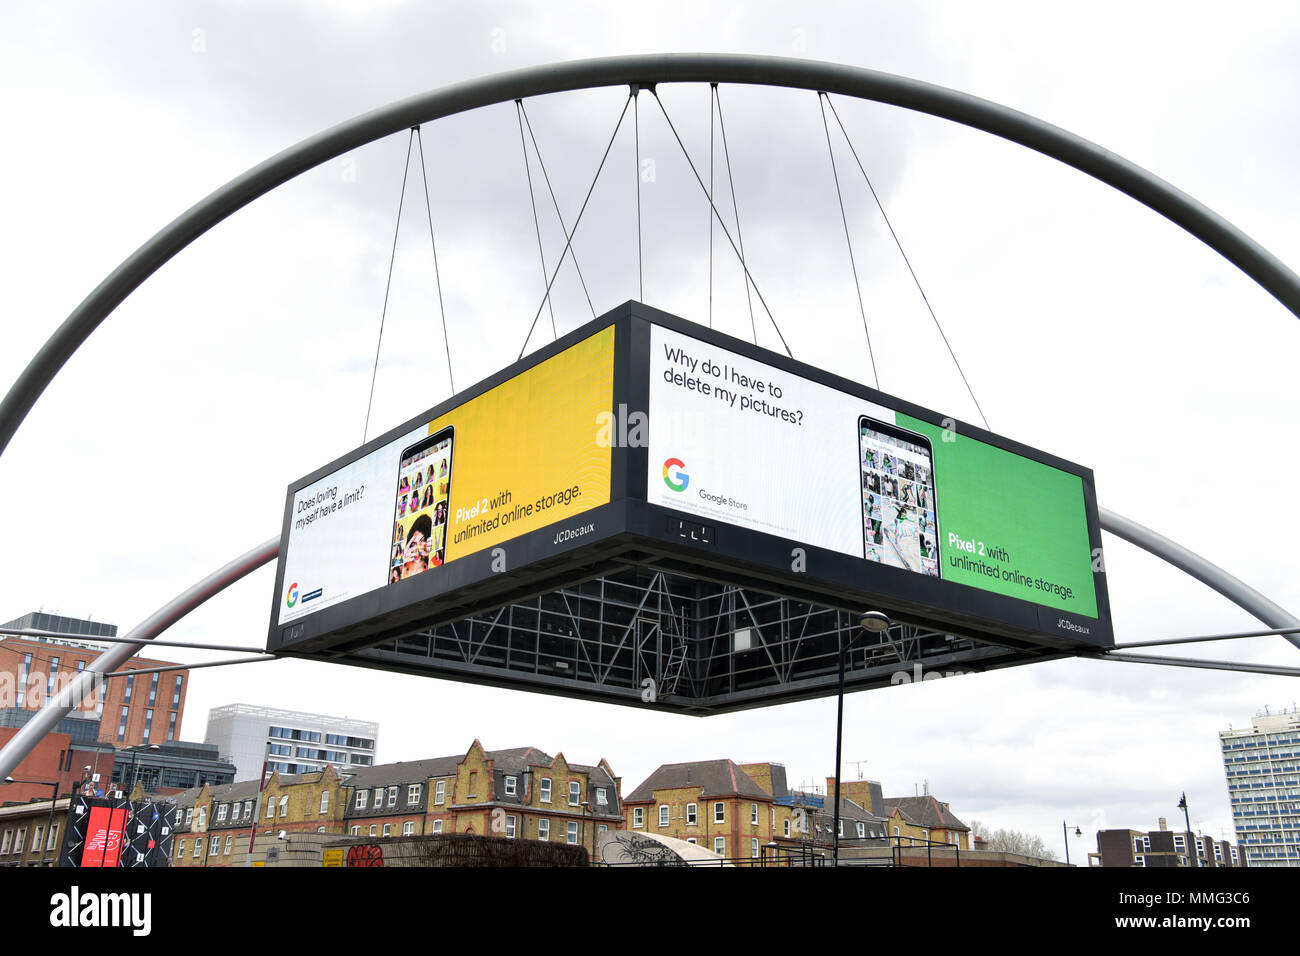 Digital advertising hoardings promoting Google Store and mobile phone EE Pixel 2 on the Old Street Roundabout in East London, UK. Stock Photo